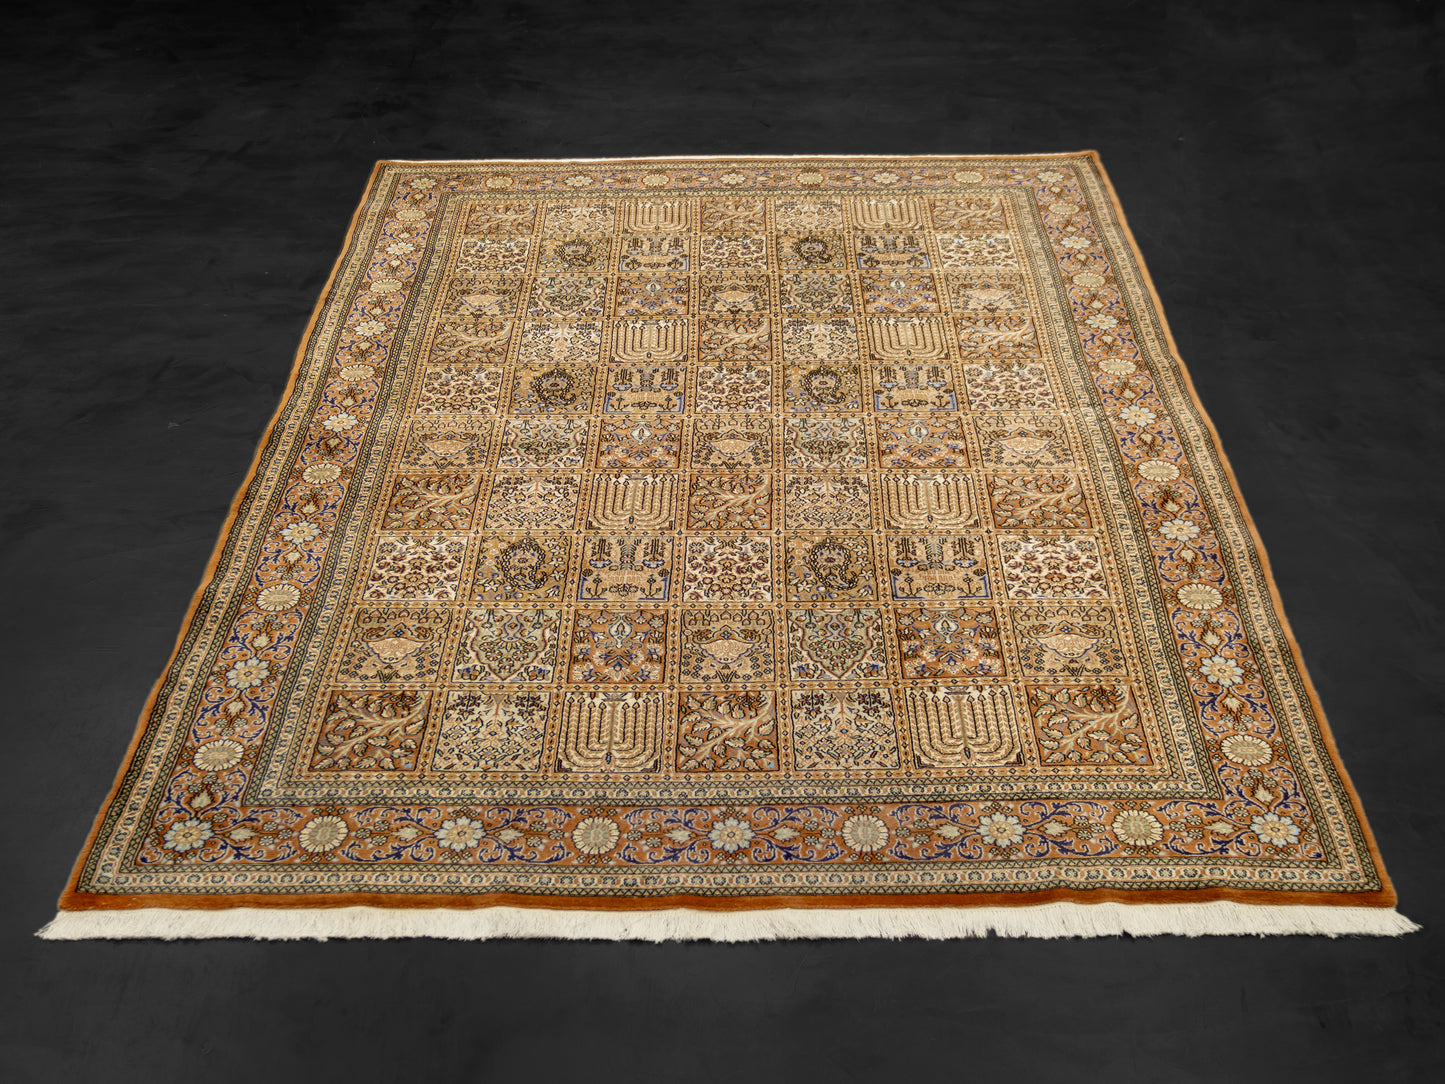 Hand-knotted Persian Wool Brown Rug "4 seasons" product image #29703128285354